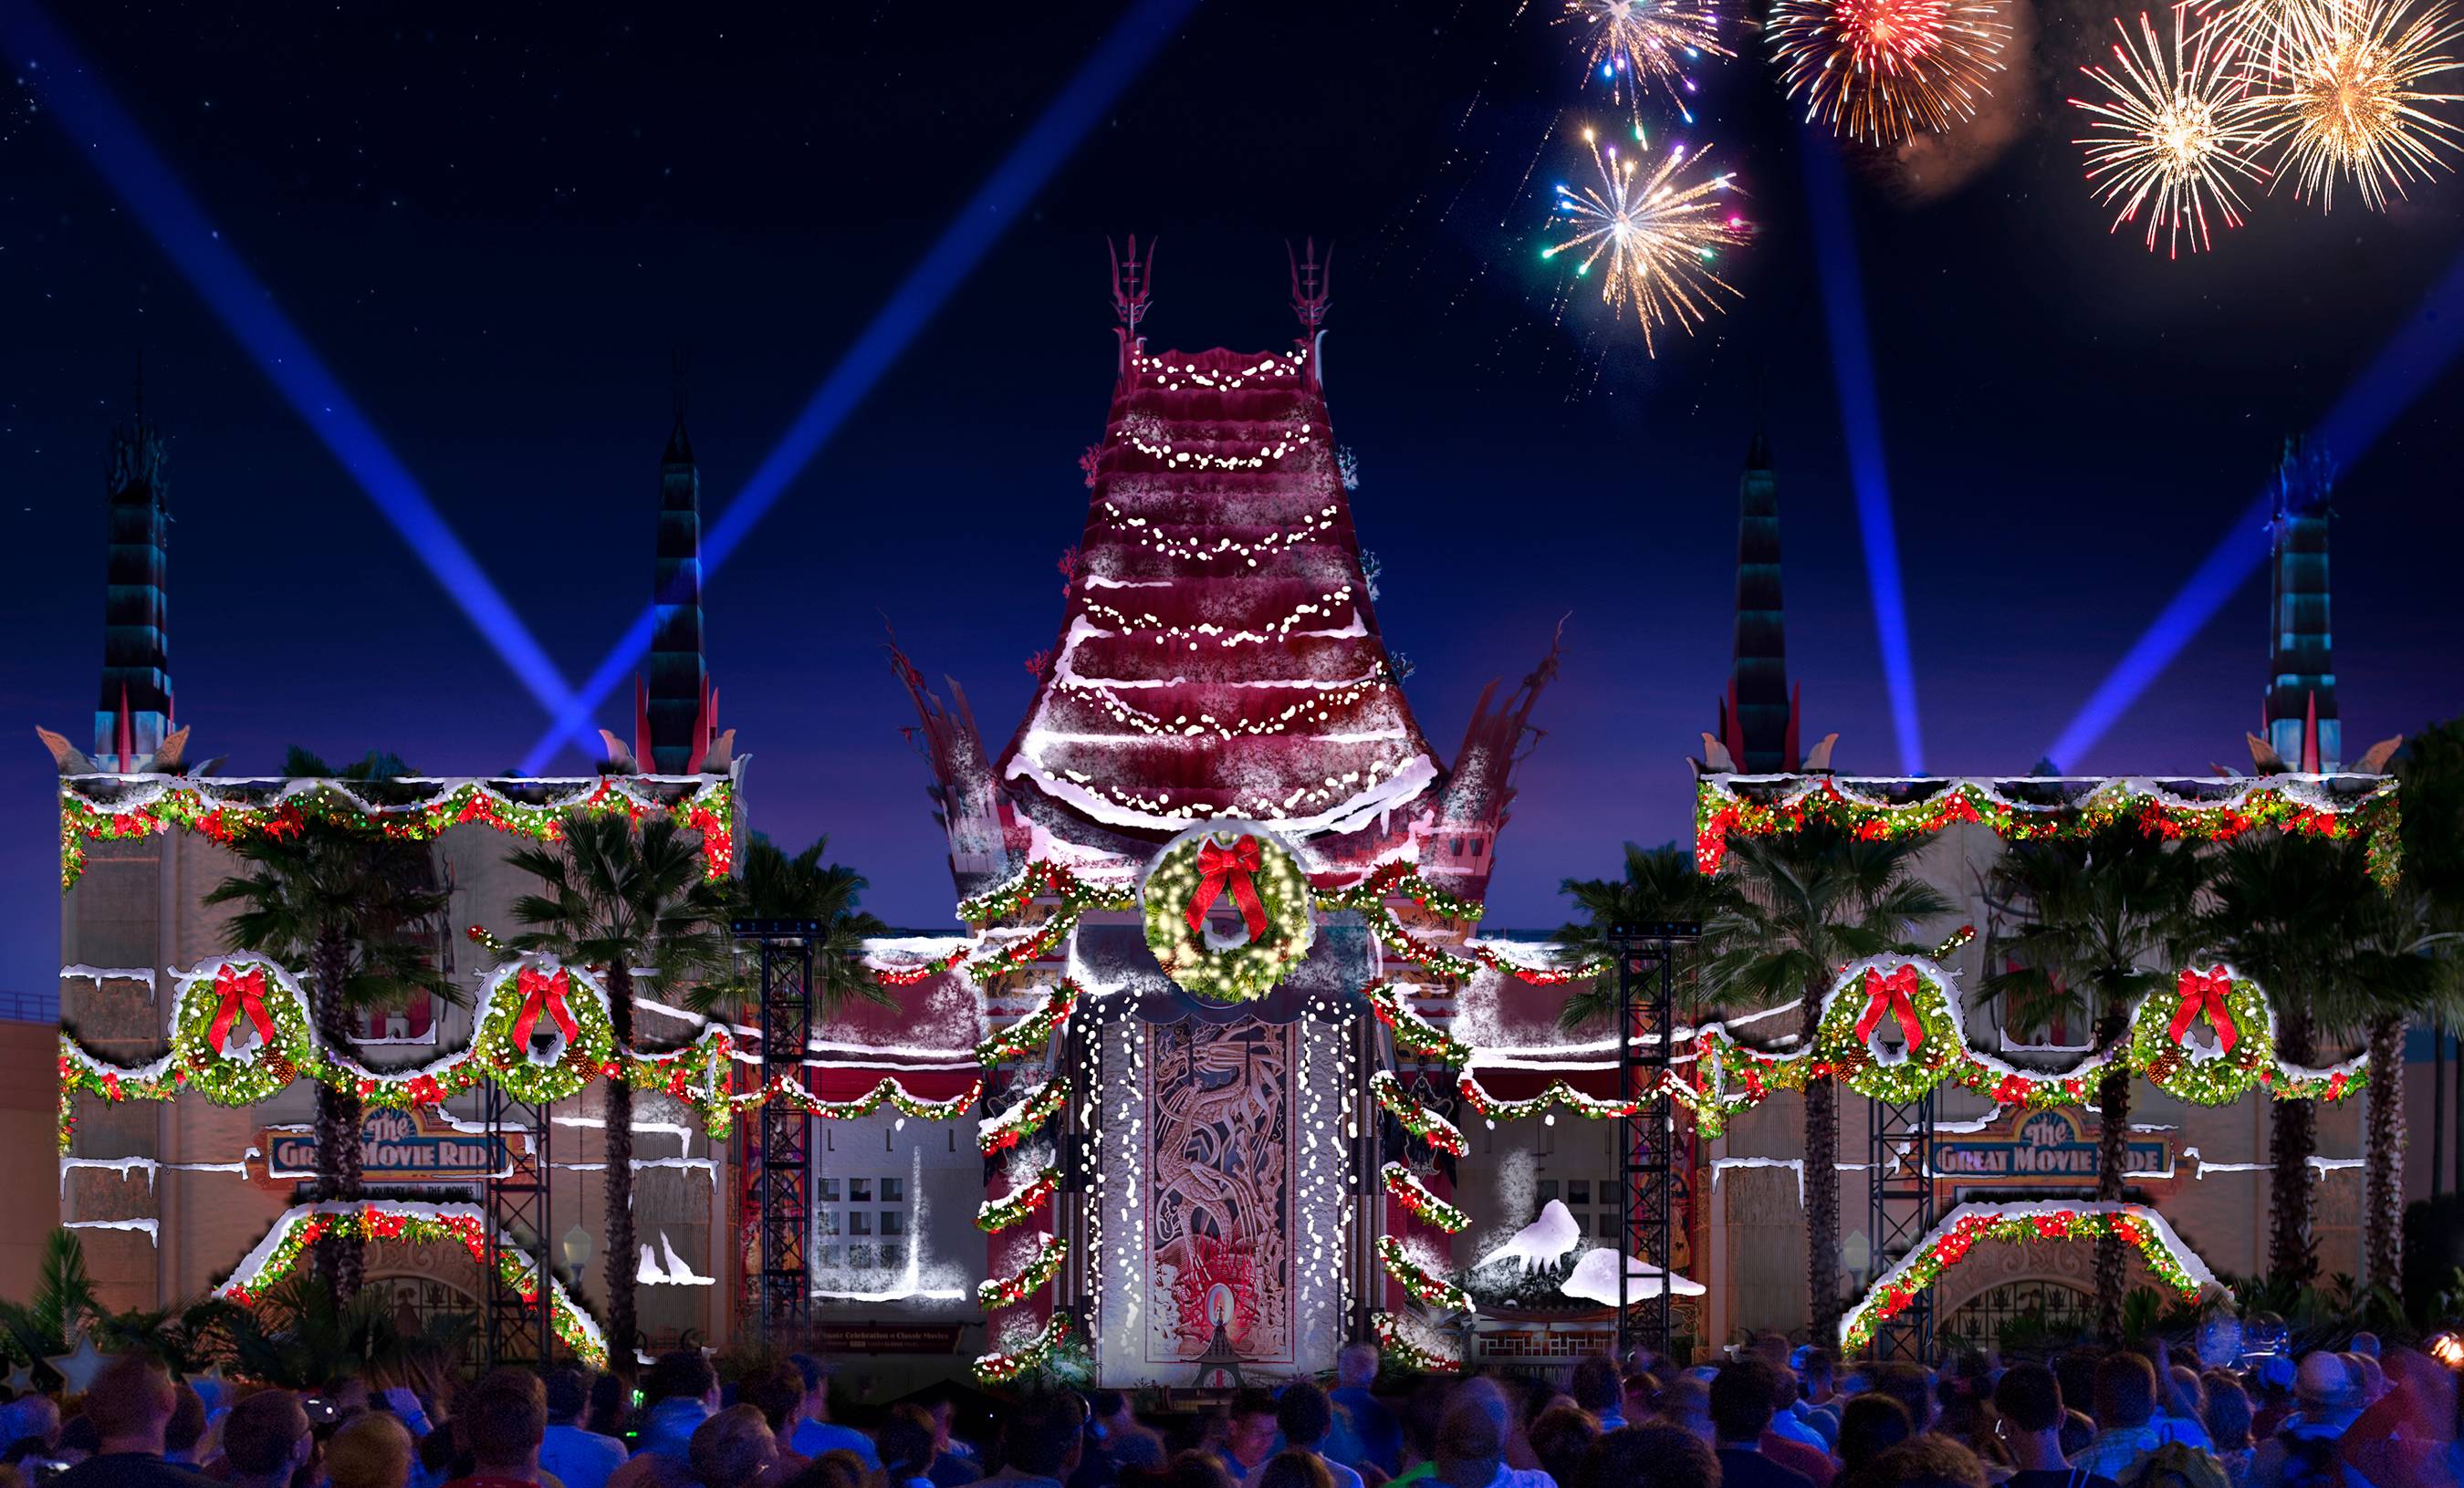 Jingle Bell, Jingle BAM! coming to Disney's Hollywood Studios for the holidays